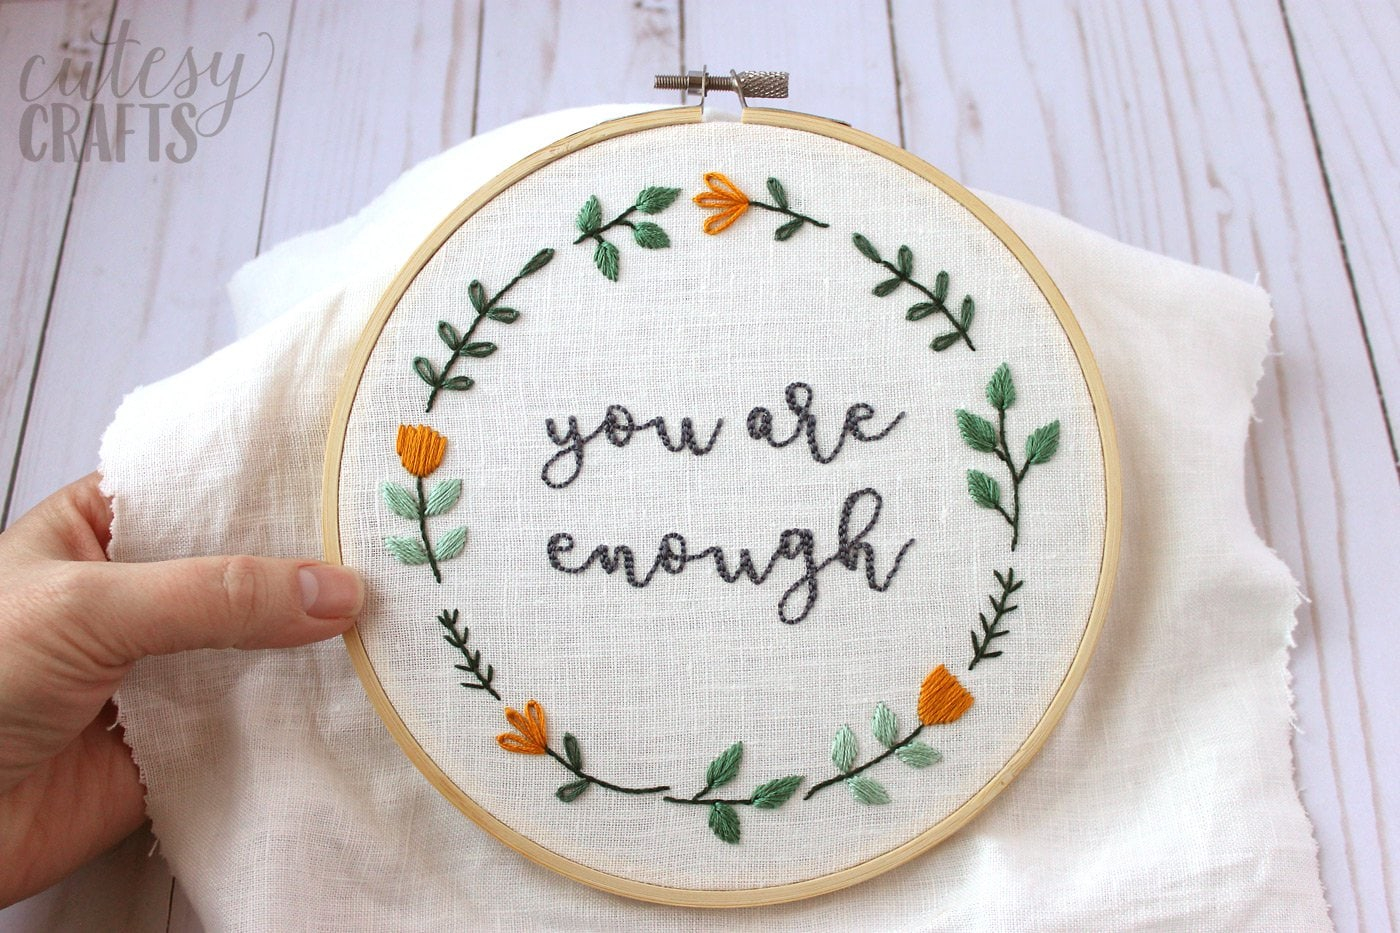 Embroidery Pattern You Are Enough Free Hand Embroidery Pattern The Polka Dot Chair